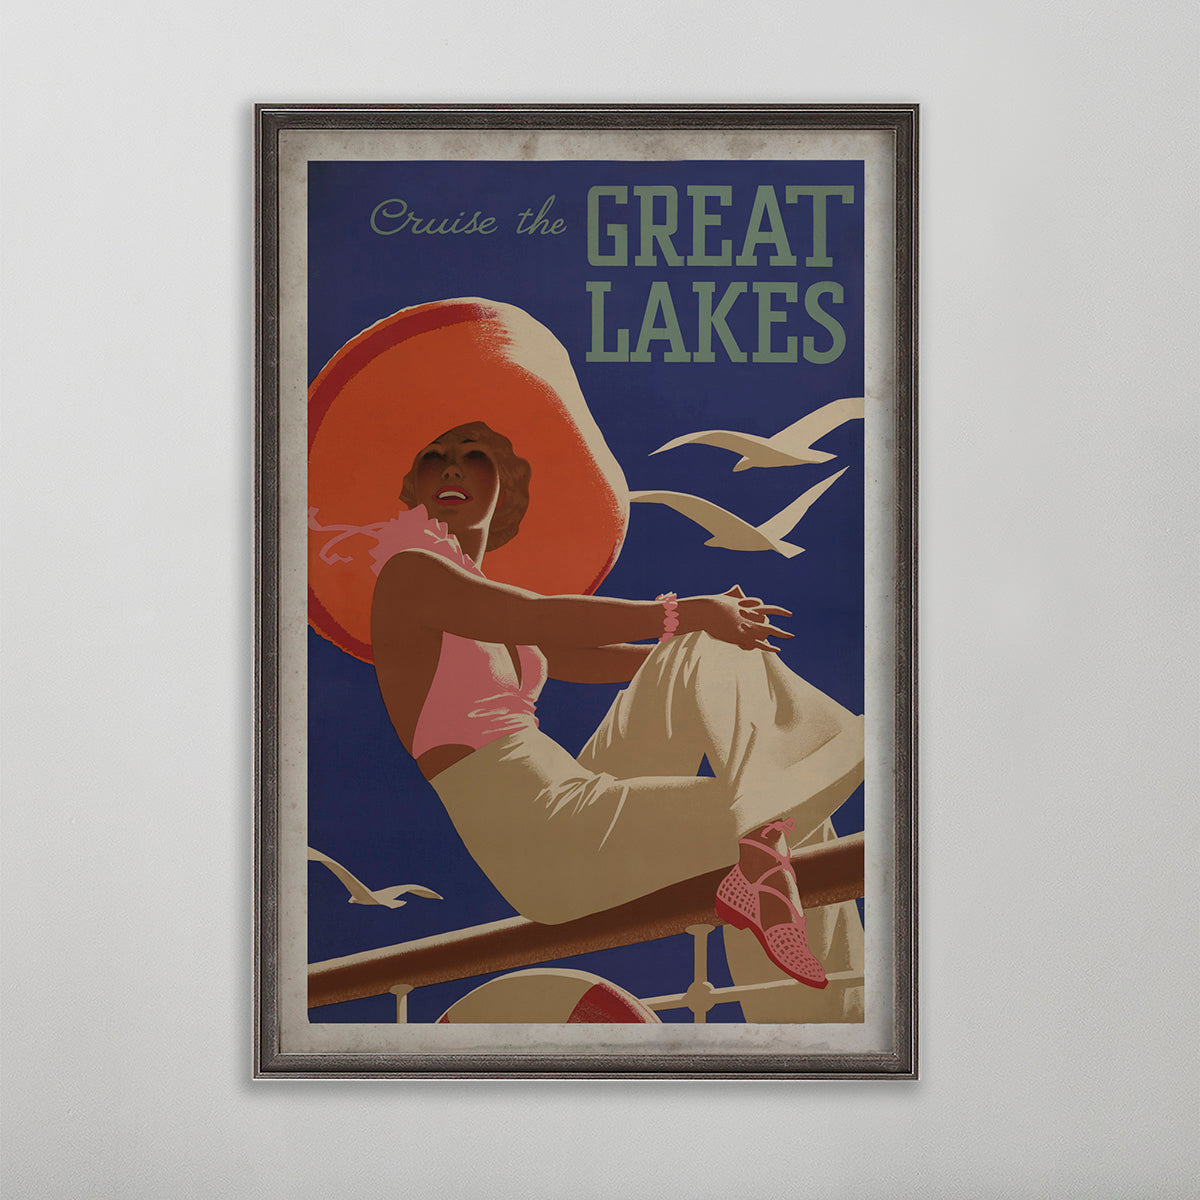 Great Lakes vintage travel poster. Woman on rail of boat with orange hat with seagulls. 